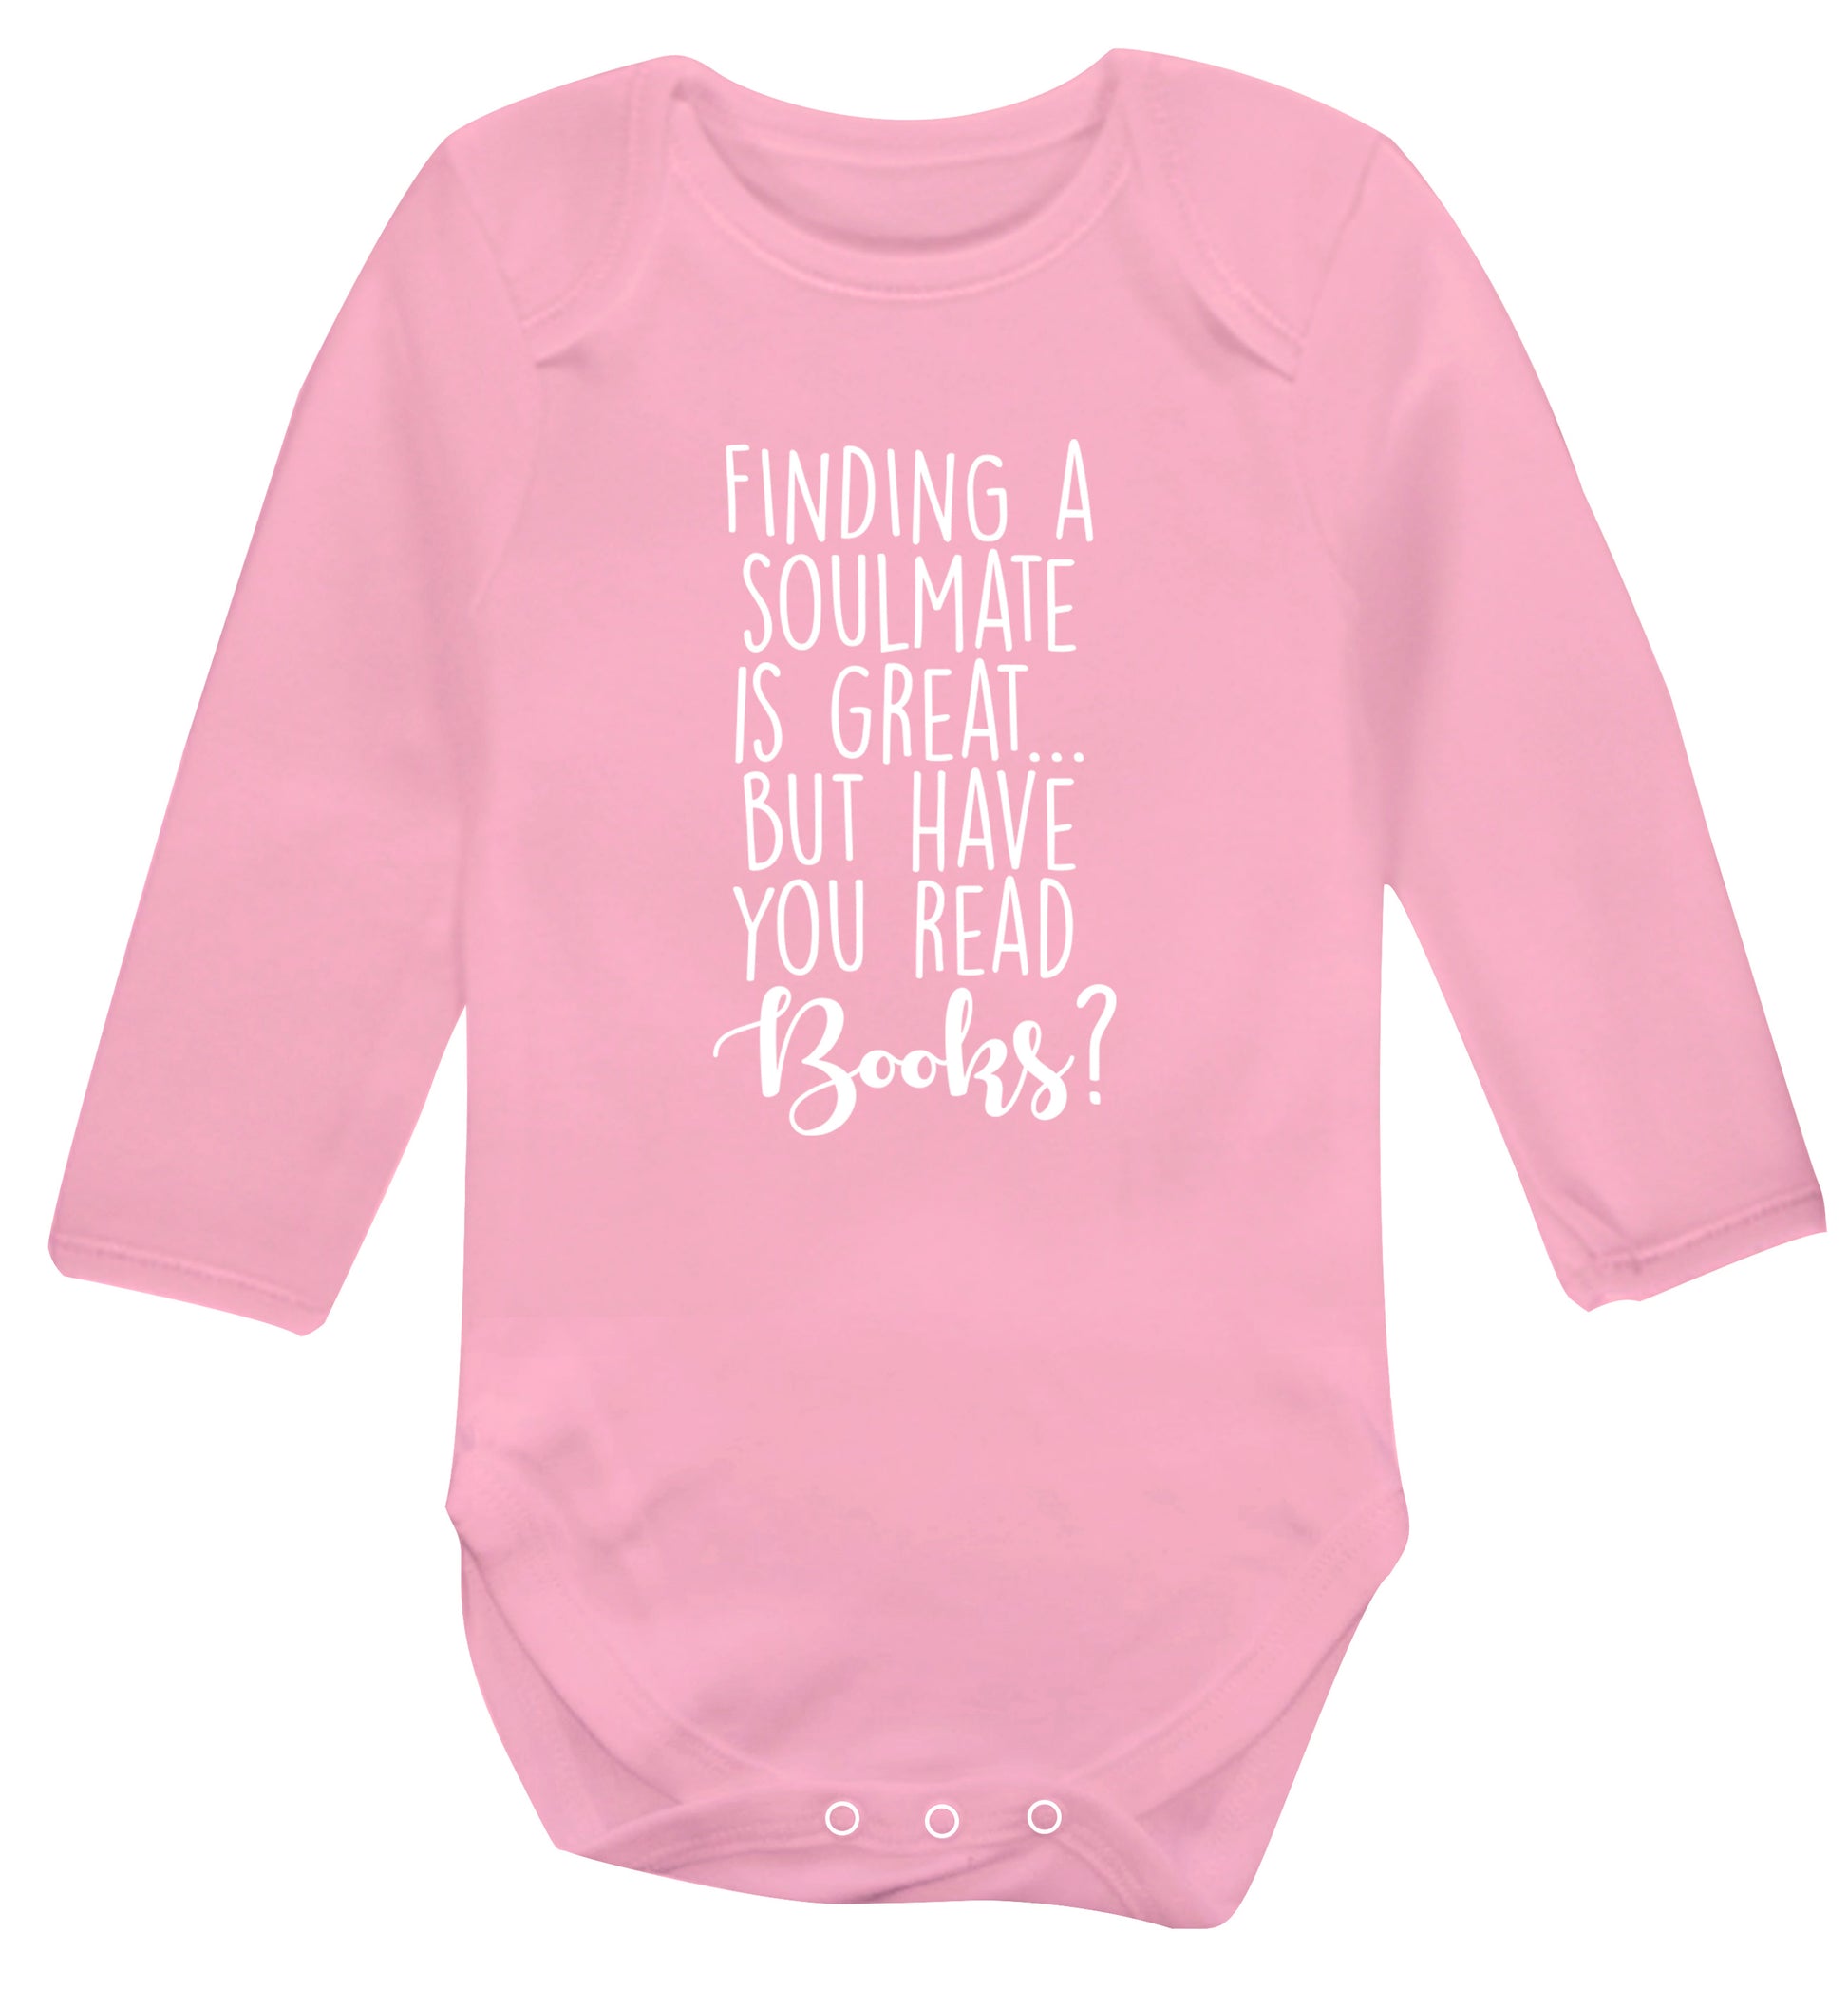 Finding a soulmate is great but have you read books? Baby Vest long sleeved pale pink 6-12 months